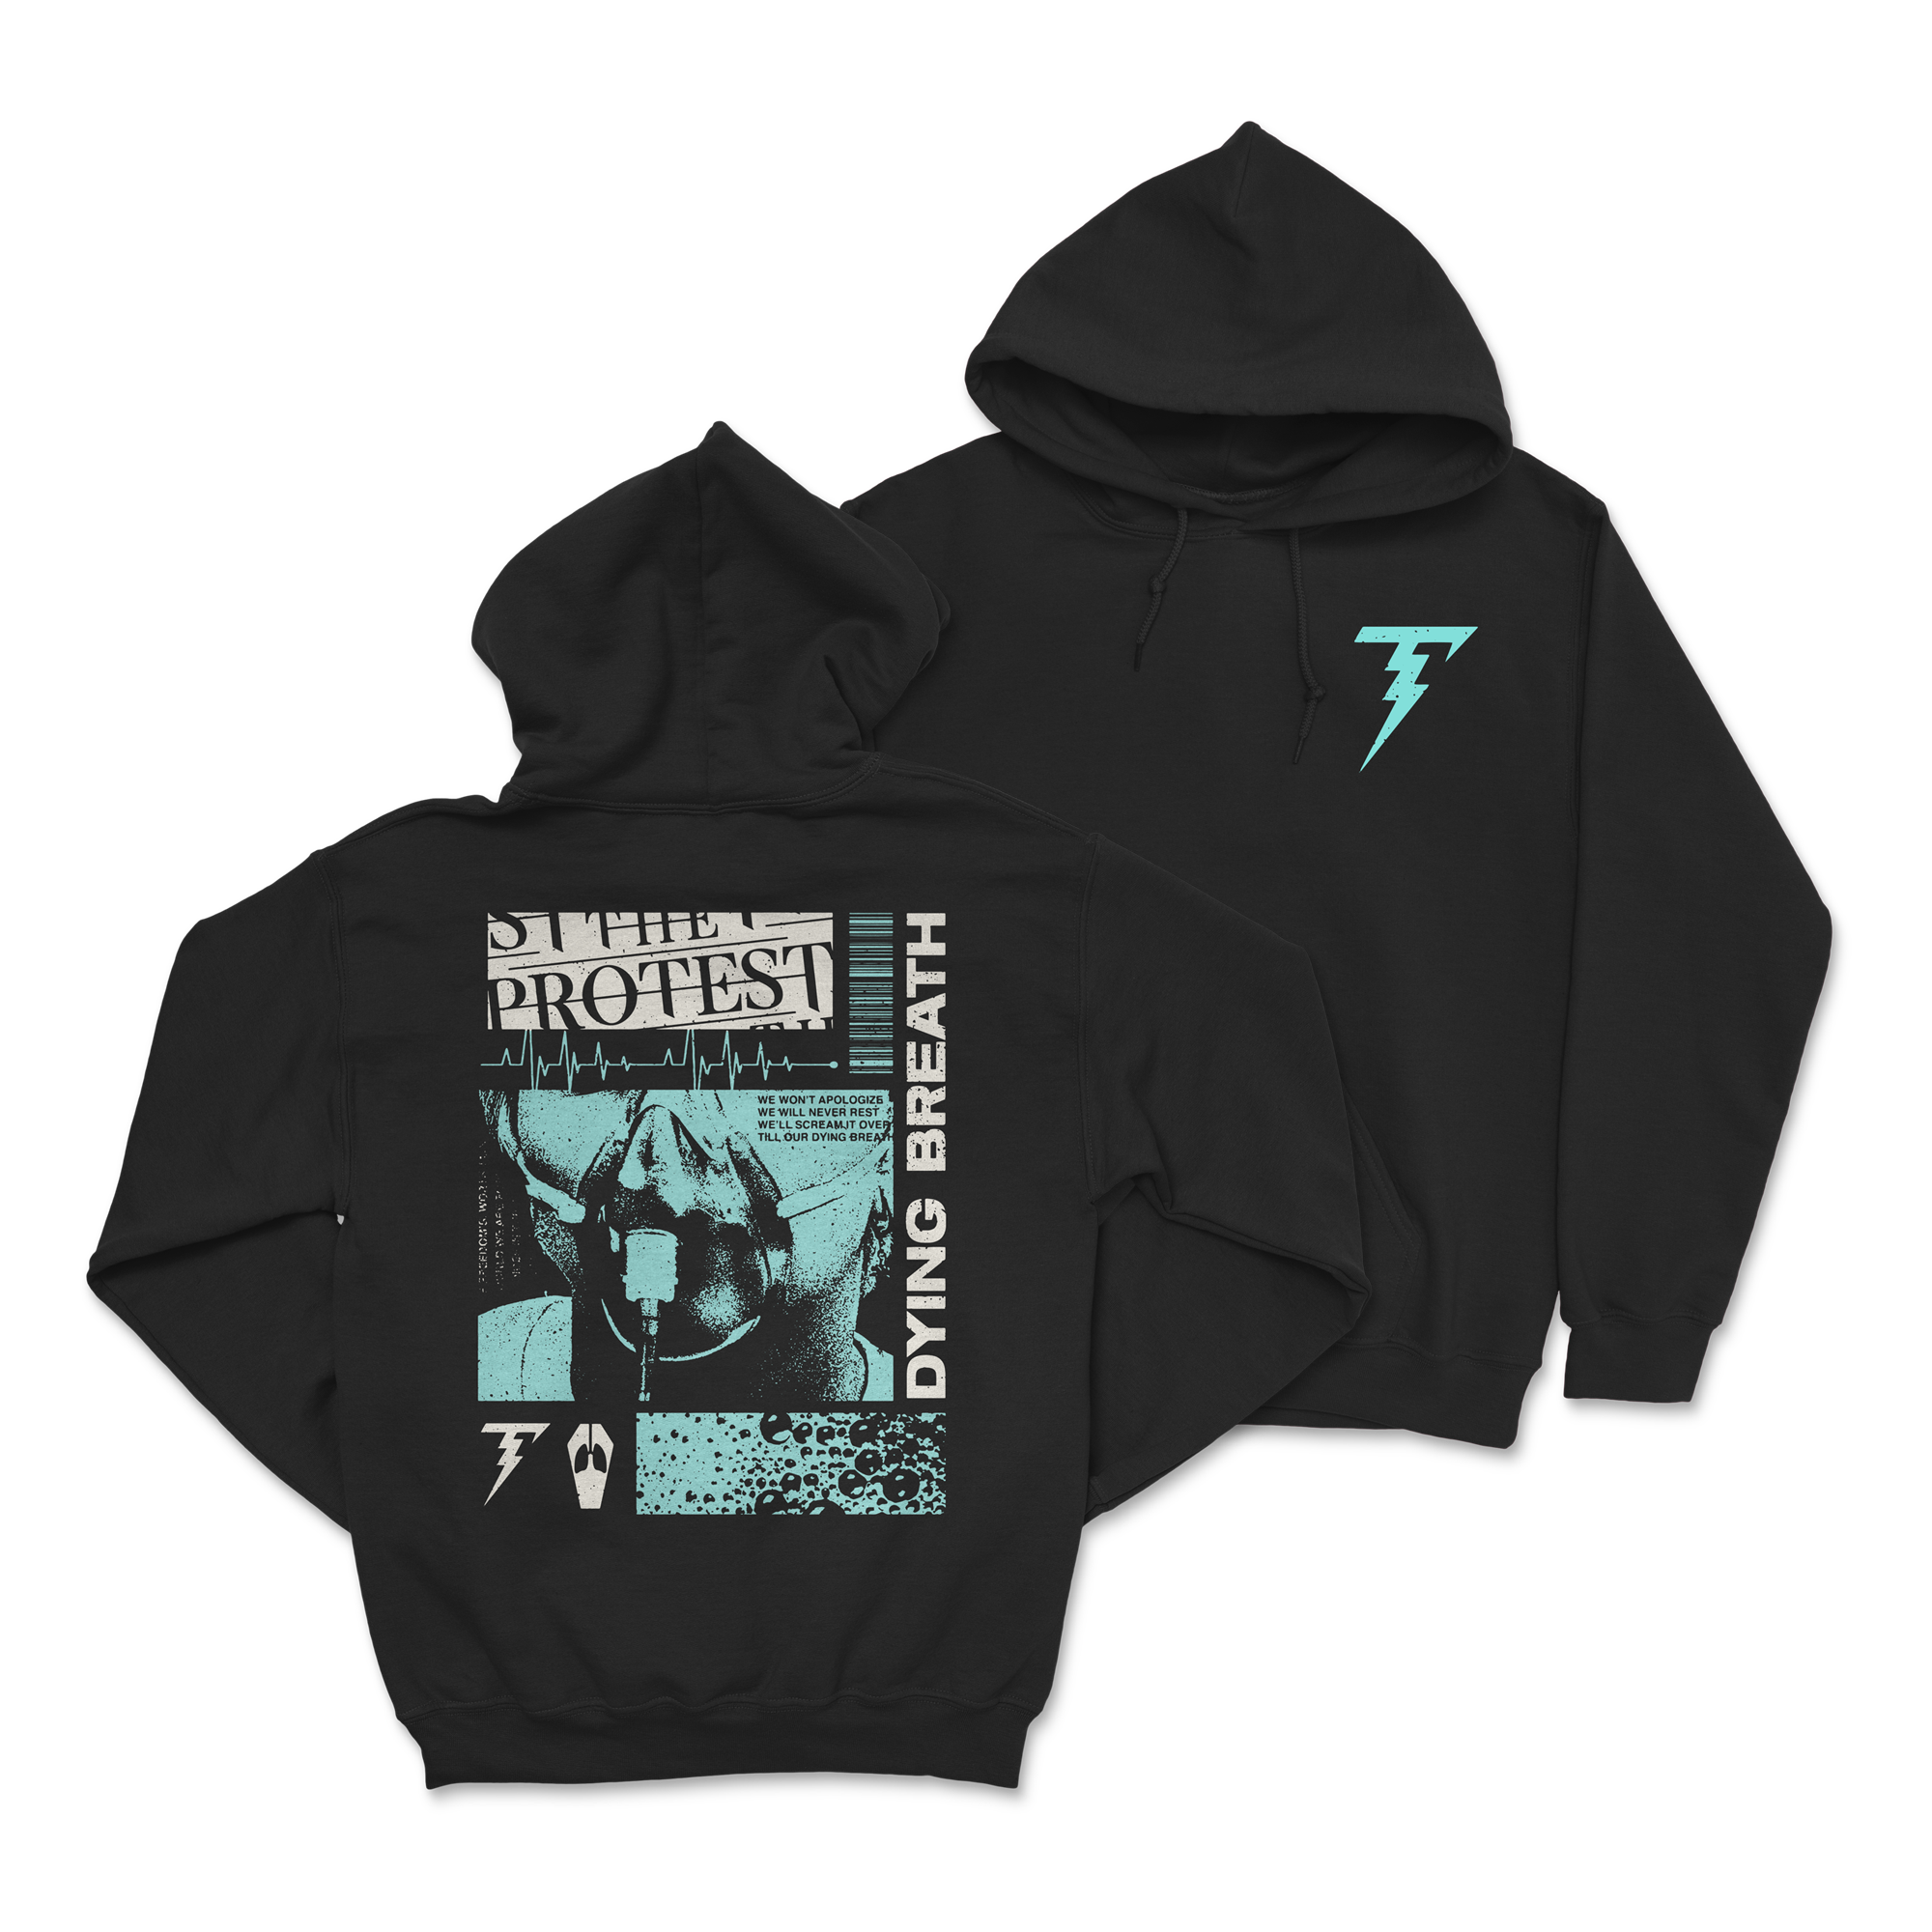 The Protest - Dying Breath Hoodie